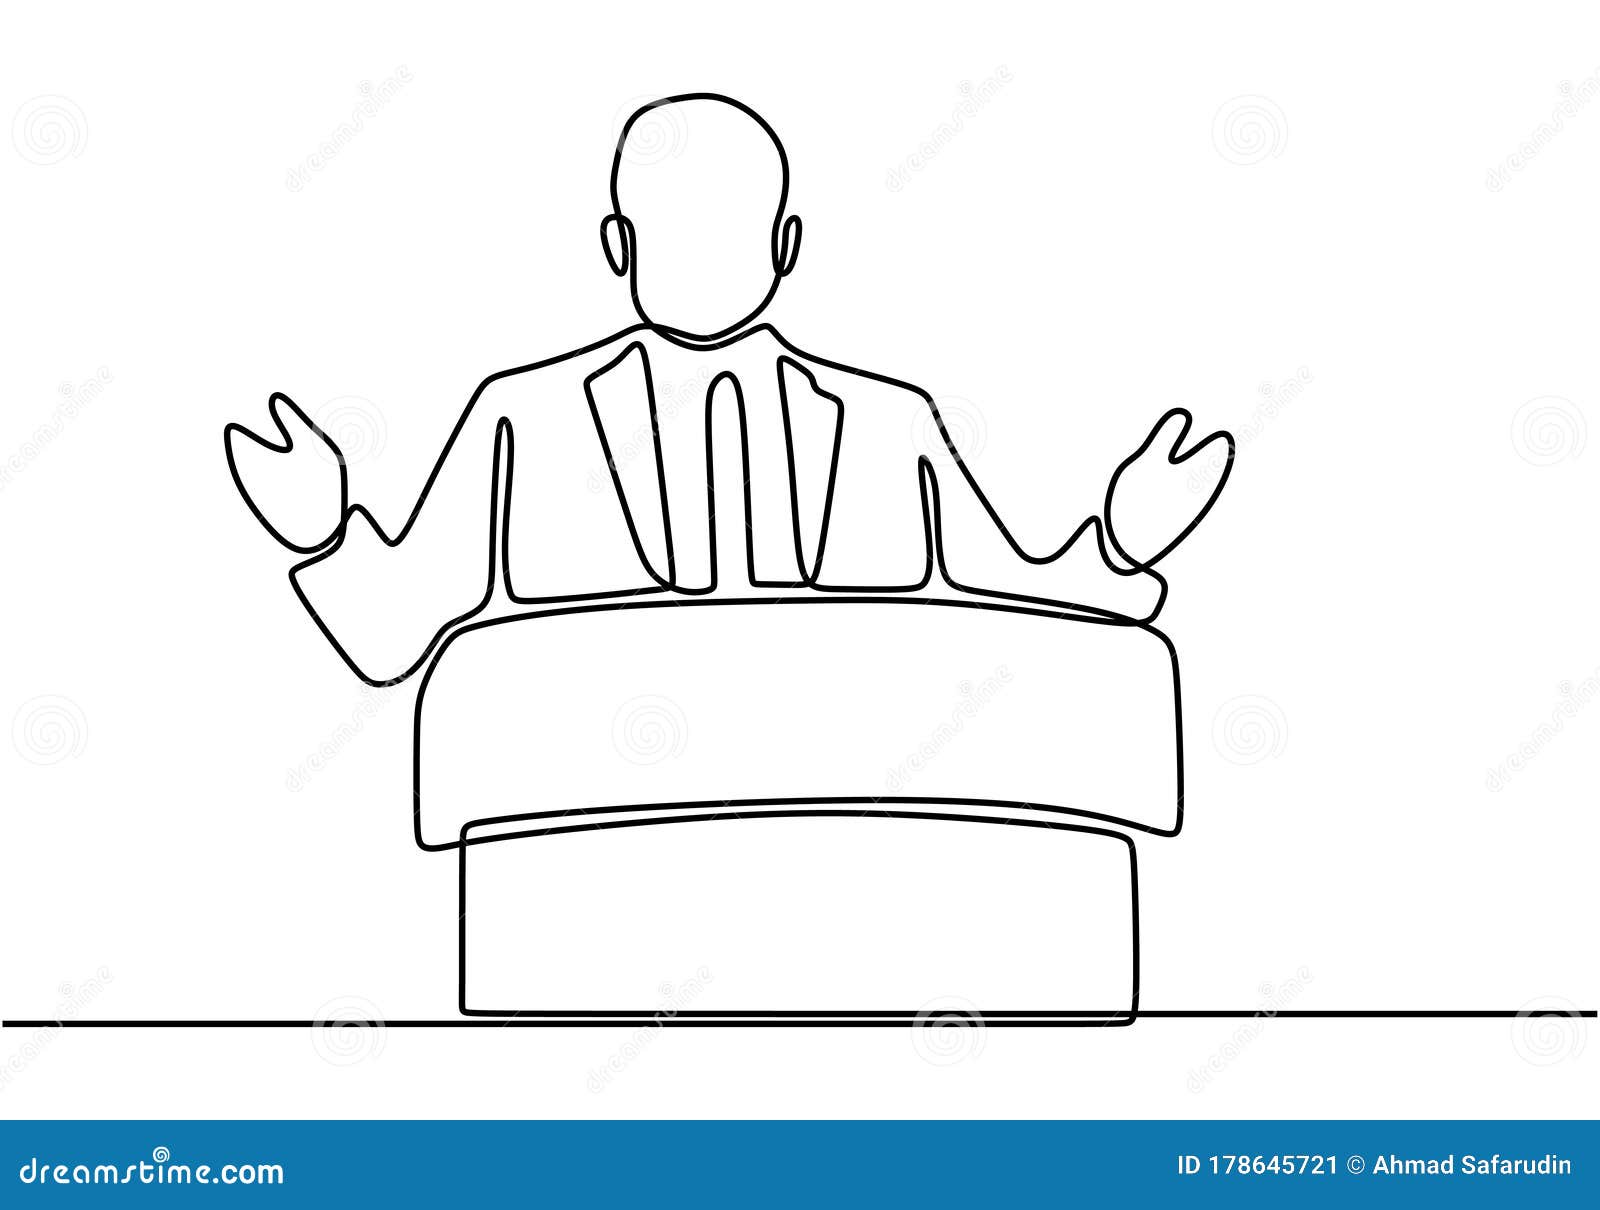 easy drawing of someone giving a speech